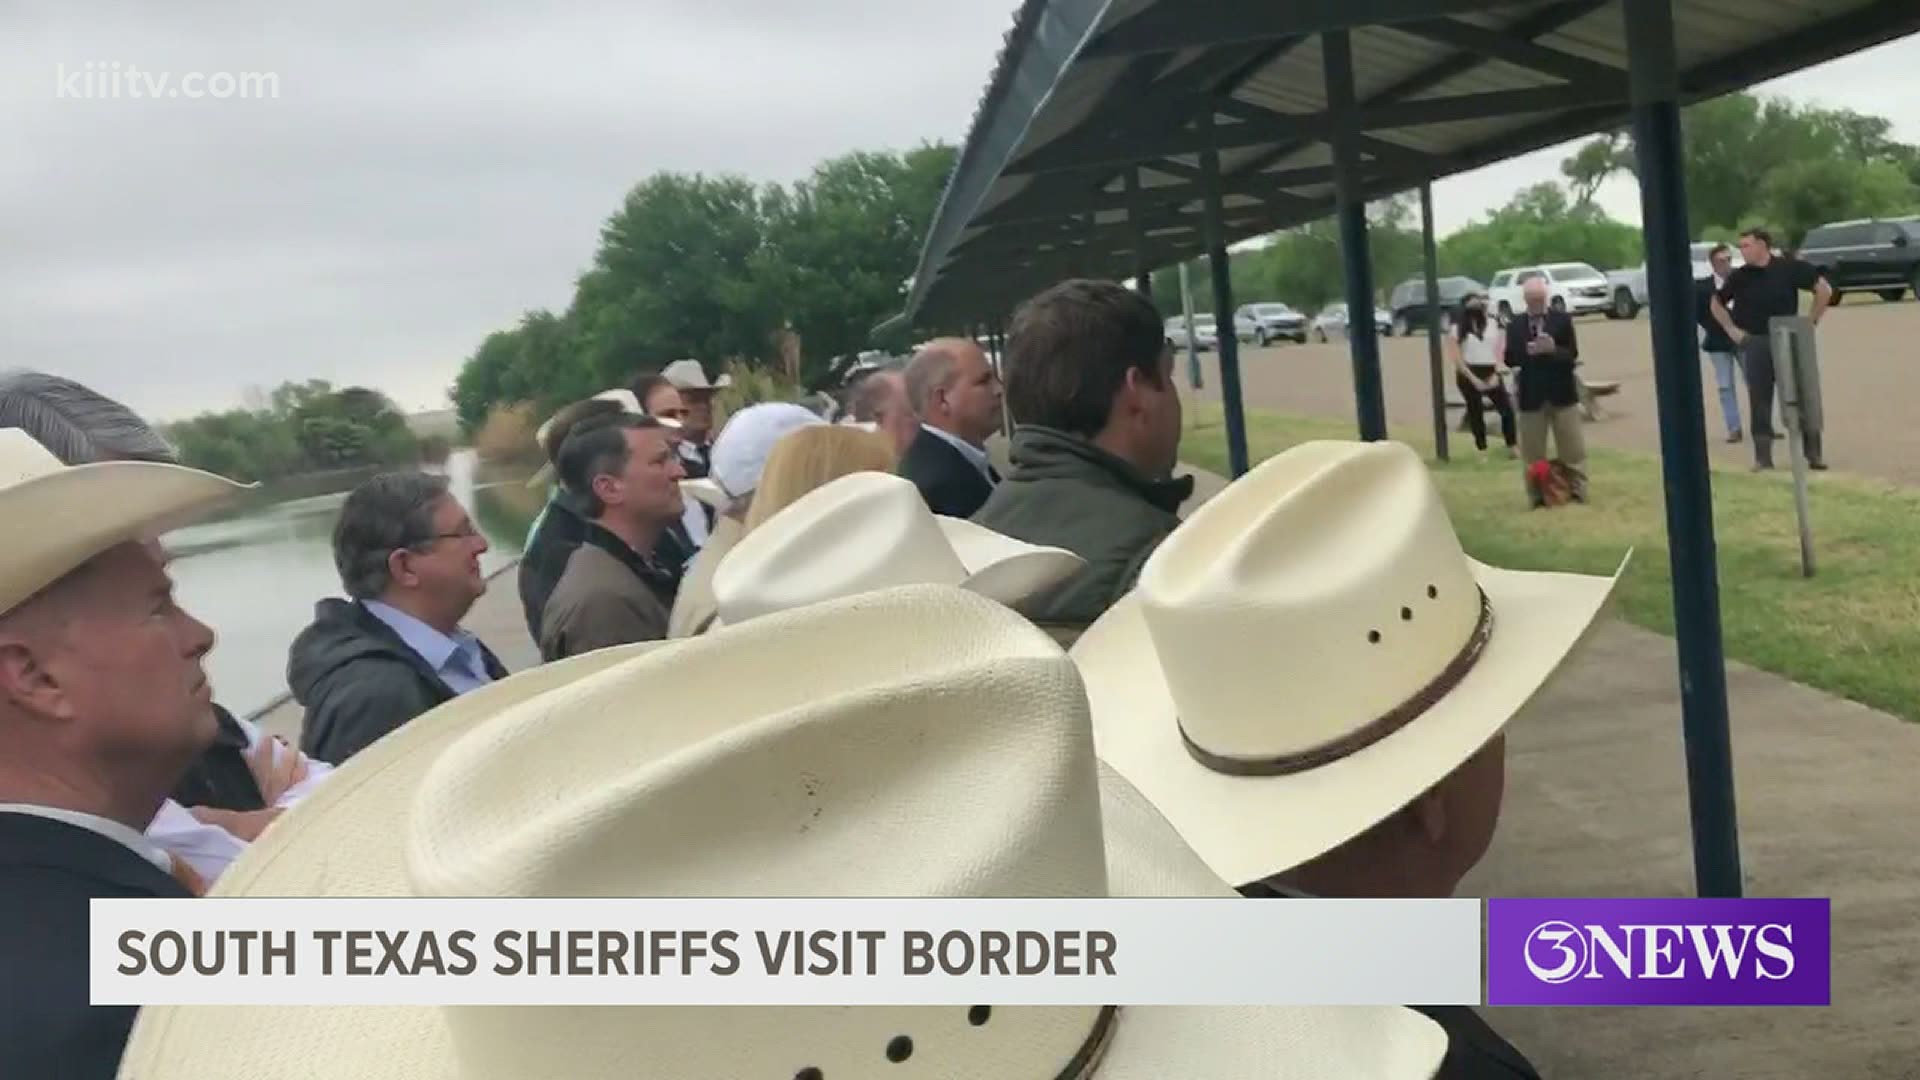 Law enforcement officials say that human smugglers are taking advantage of the current crisis at the border and making their way to places like Refugio County.